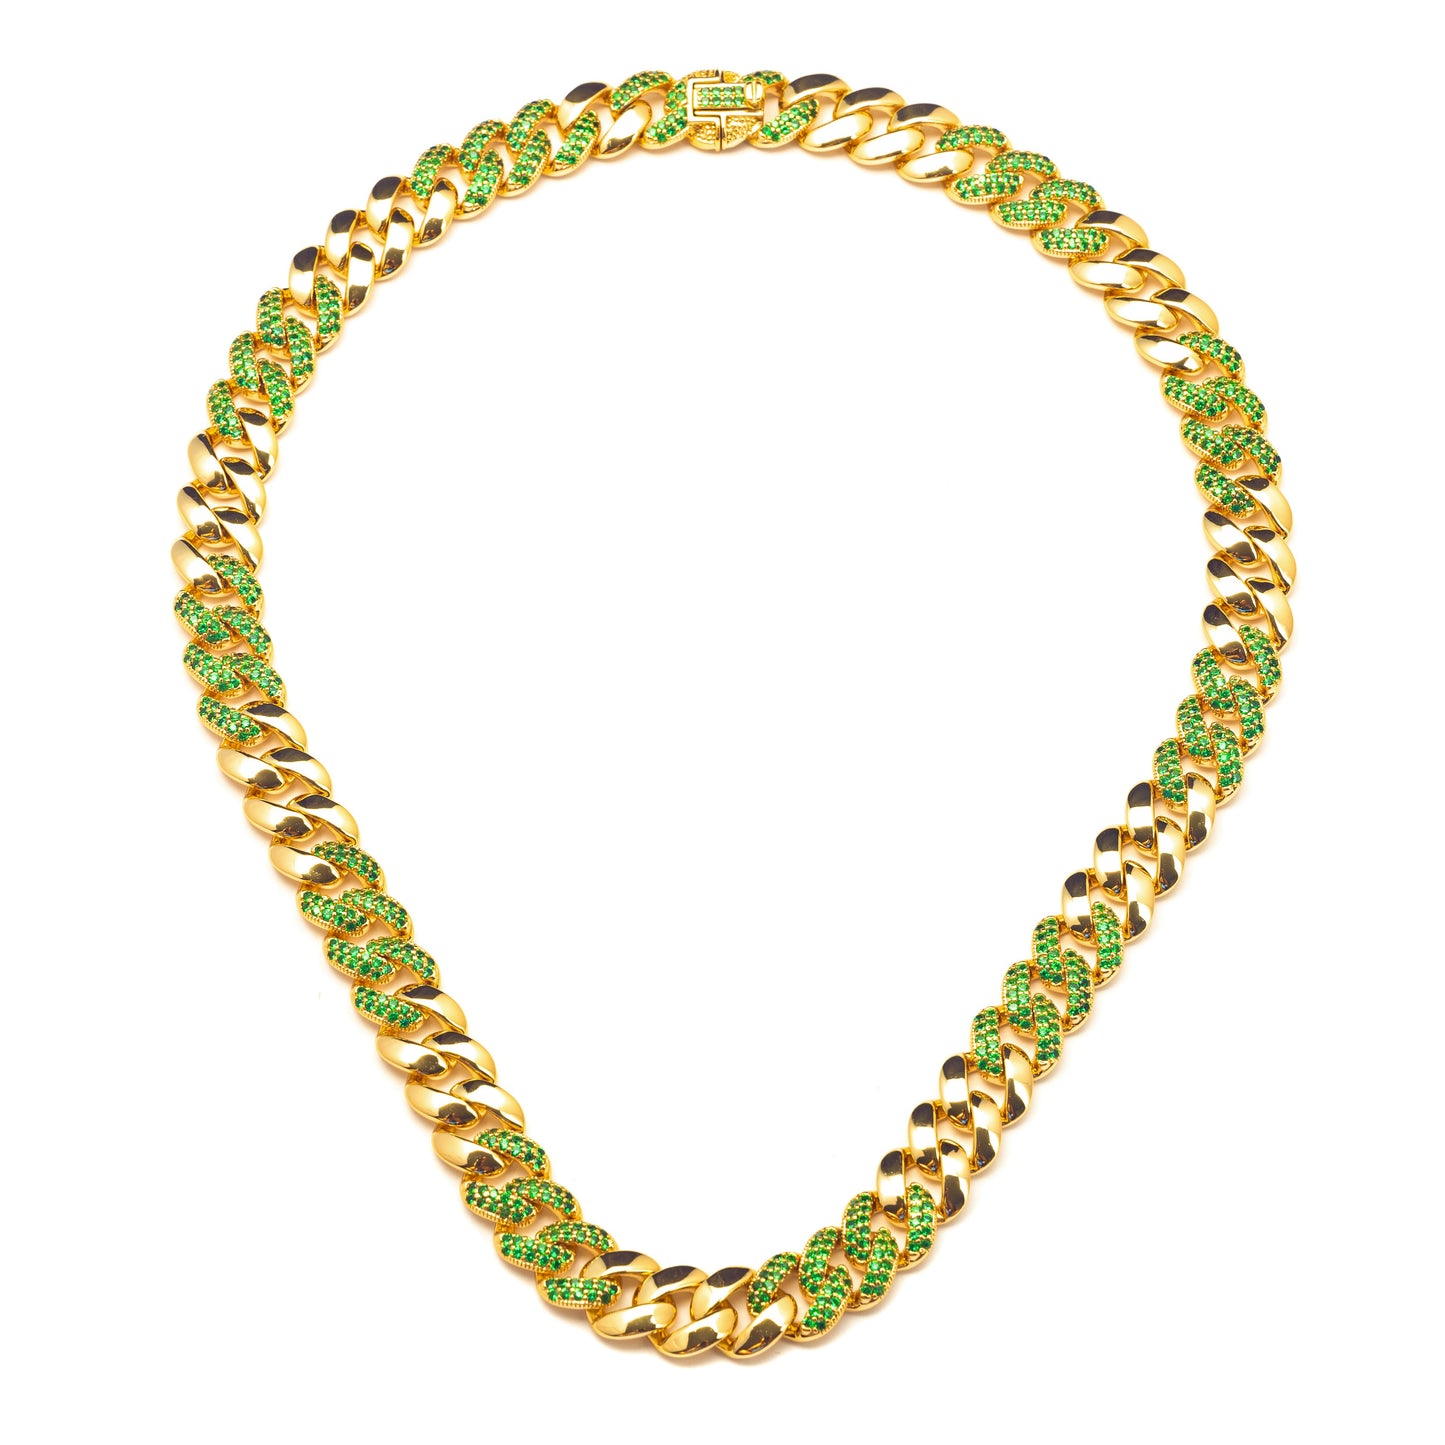 ICONIC EMERALD CUBAN LINK NECKLACE